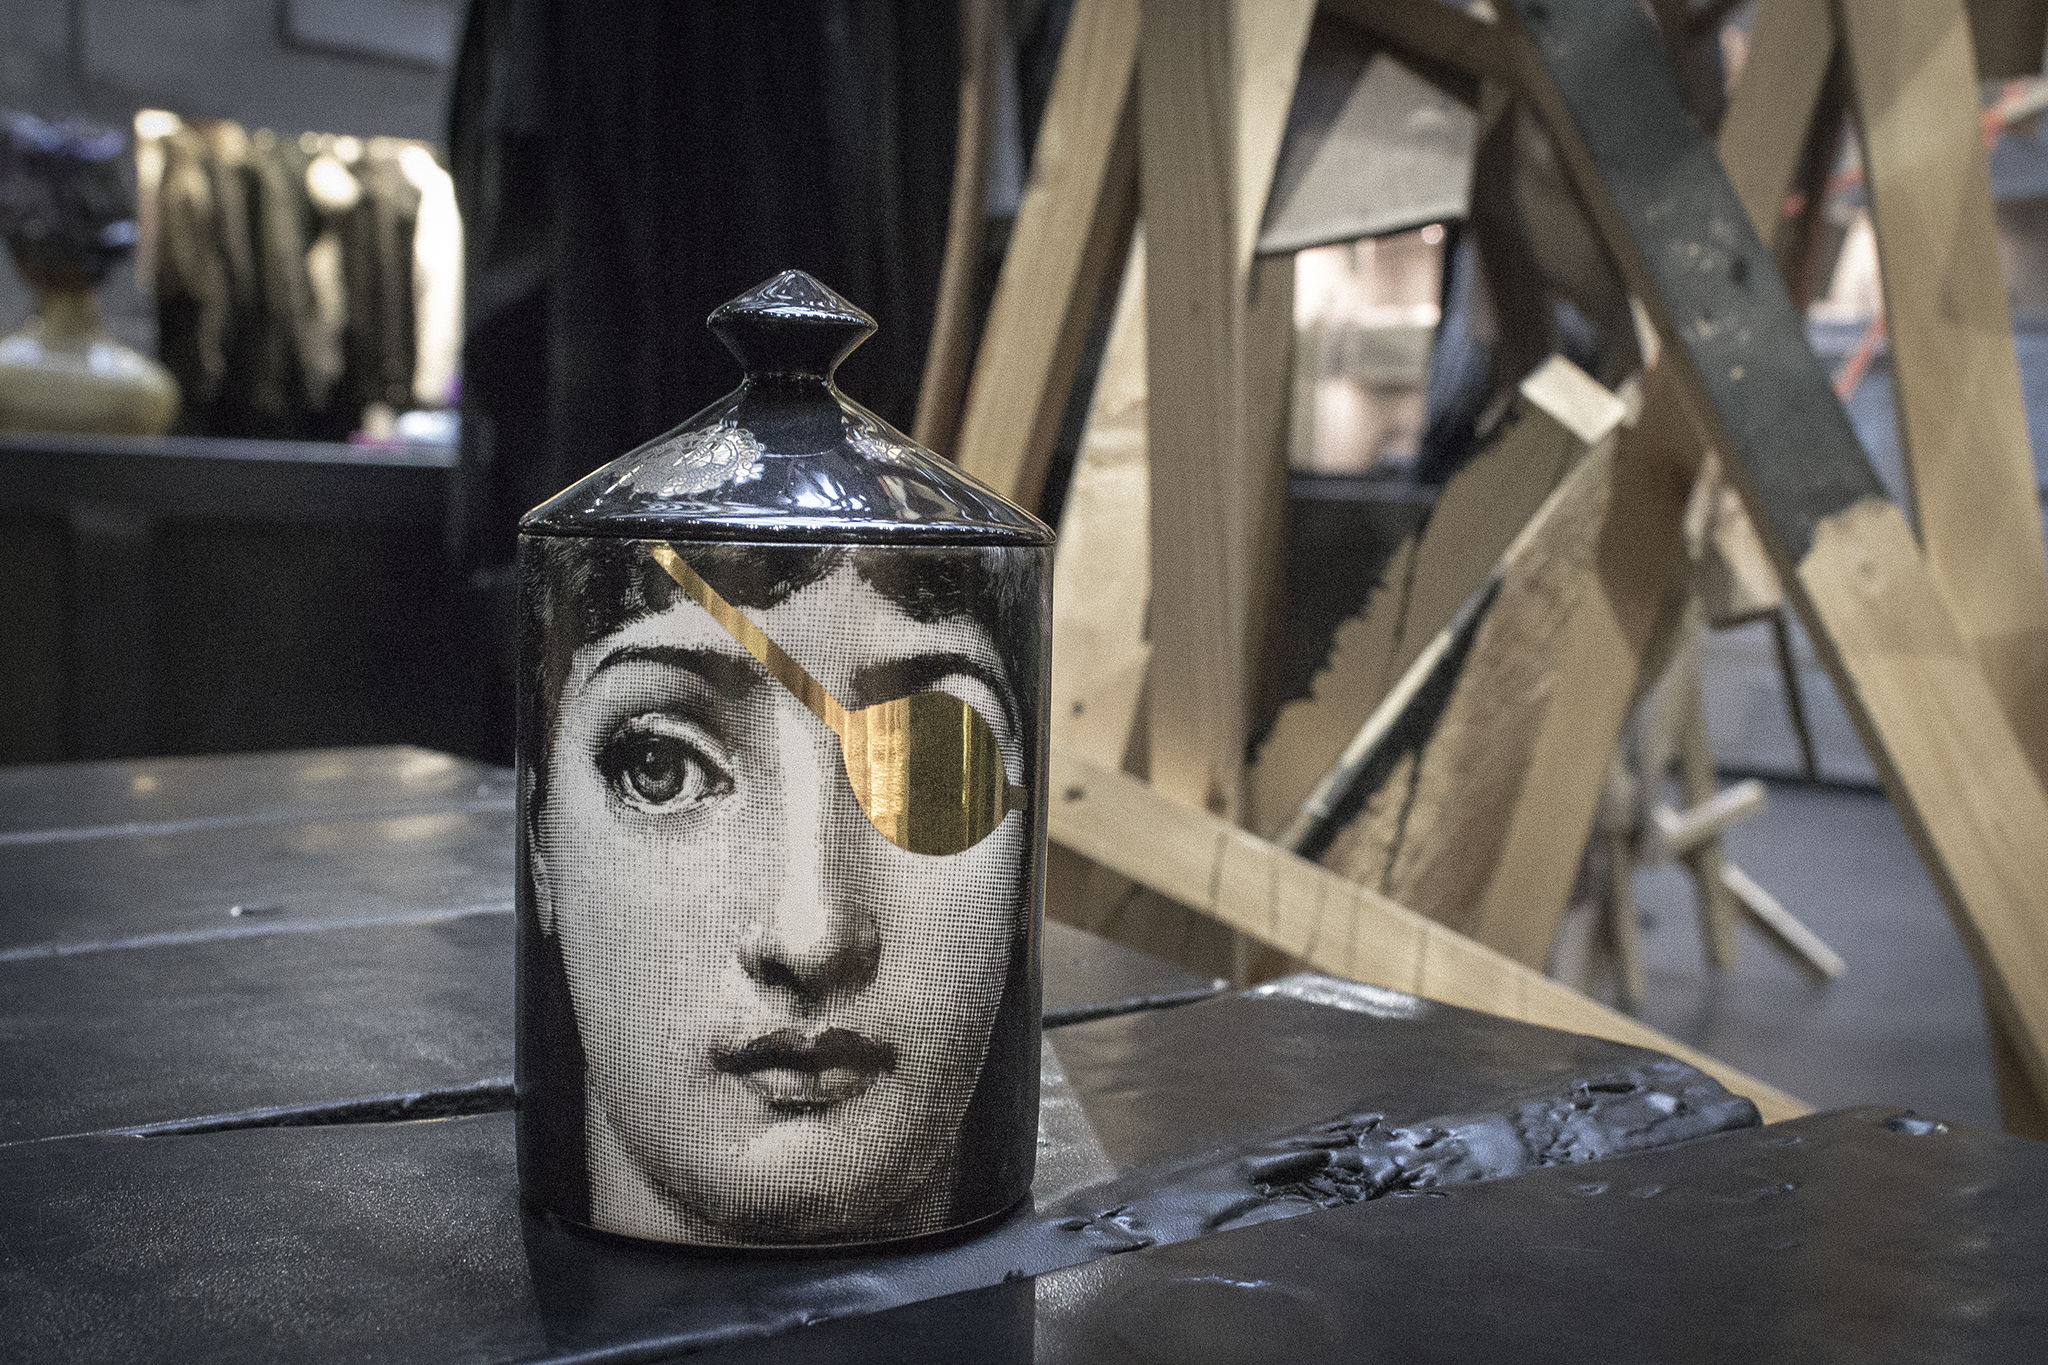 Splurge: These Fornasetti candles will burn a hole in your pocket